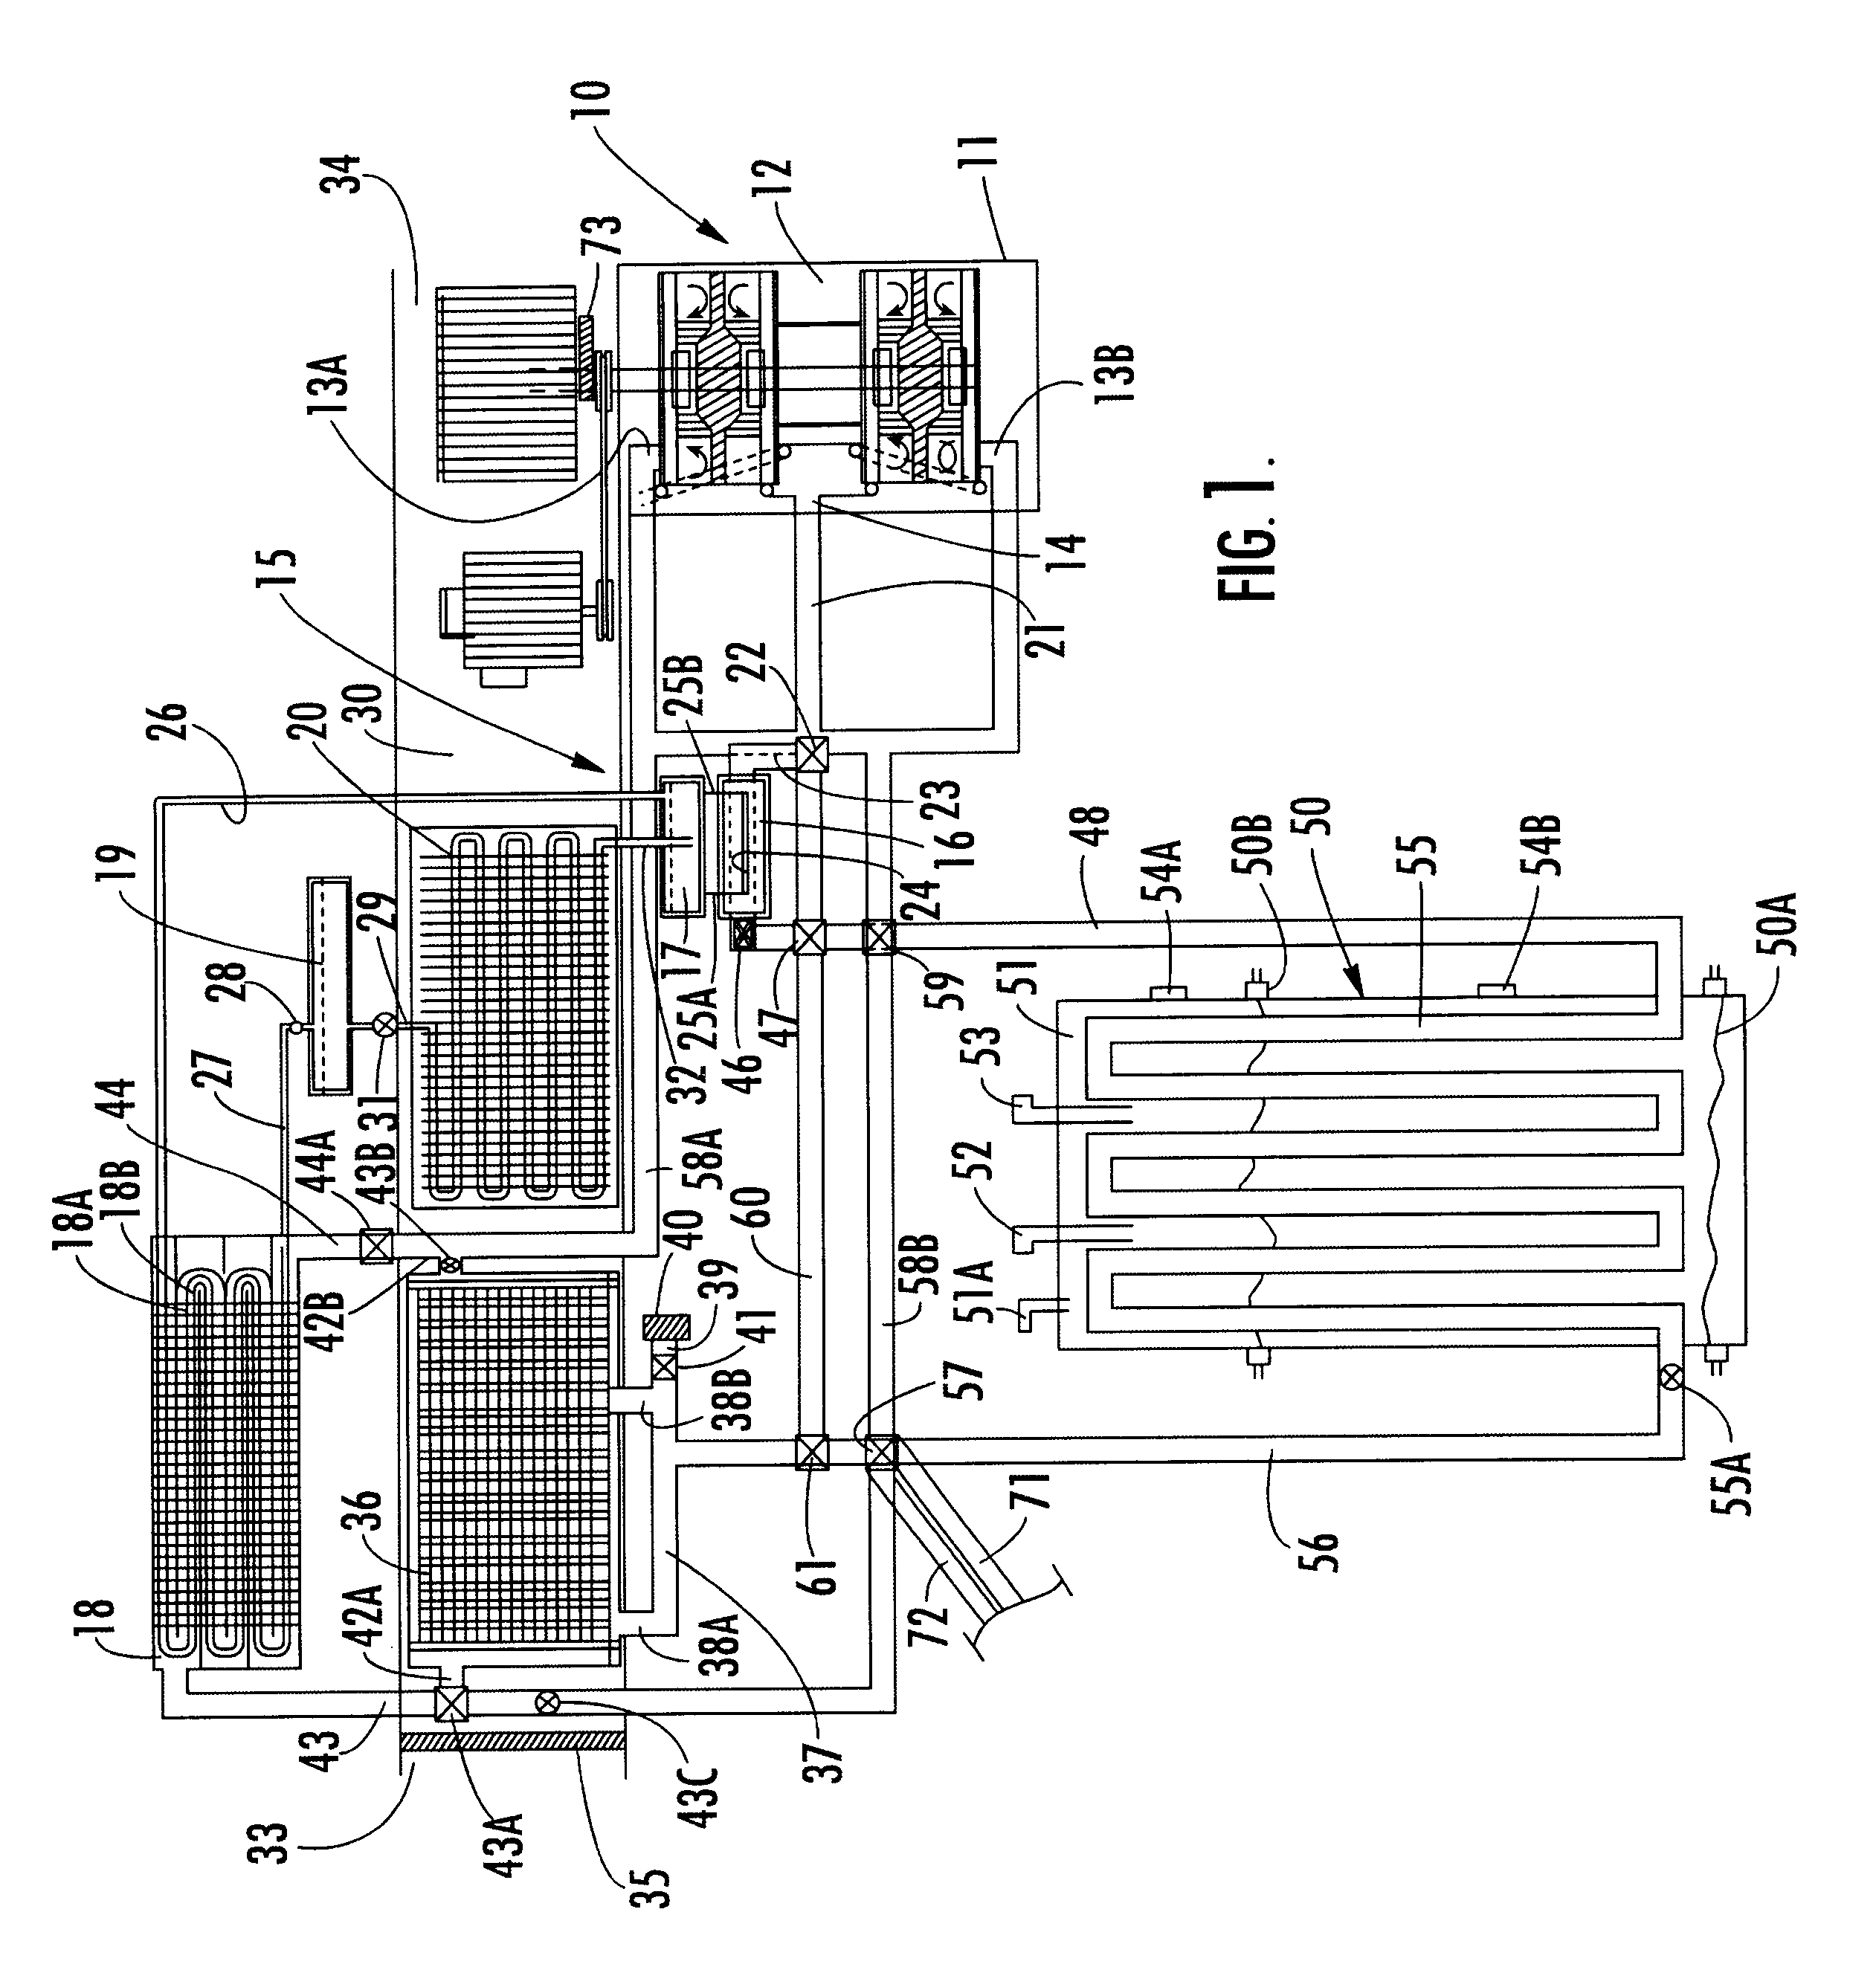 Heating and cooling system using frictional air heating